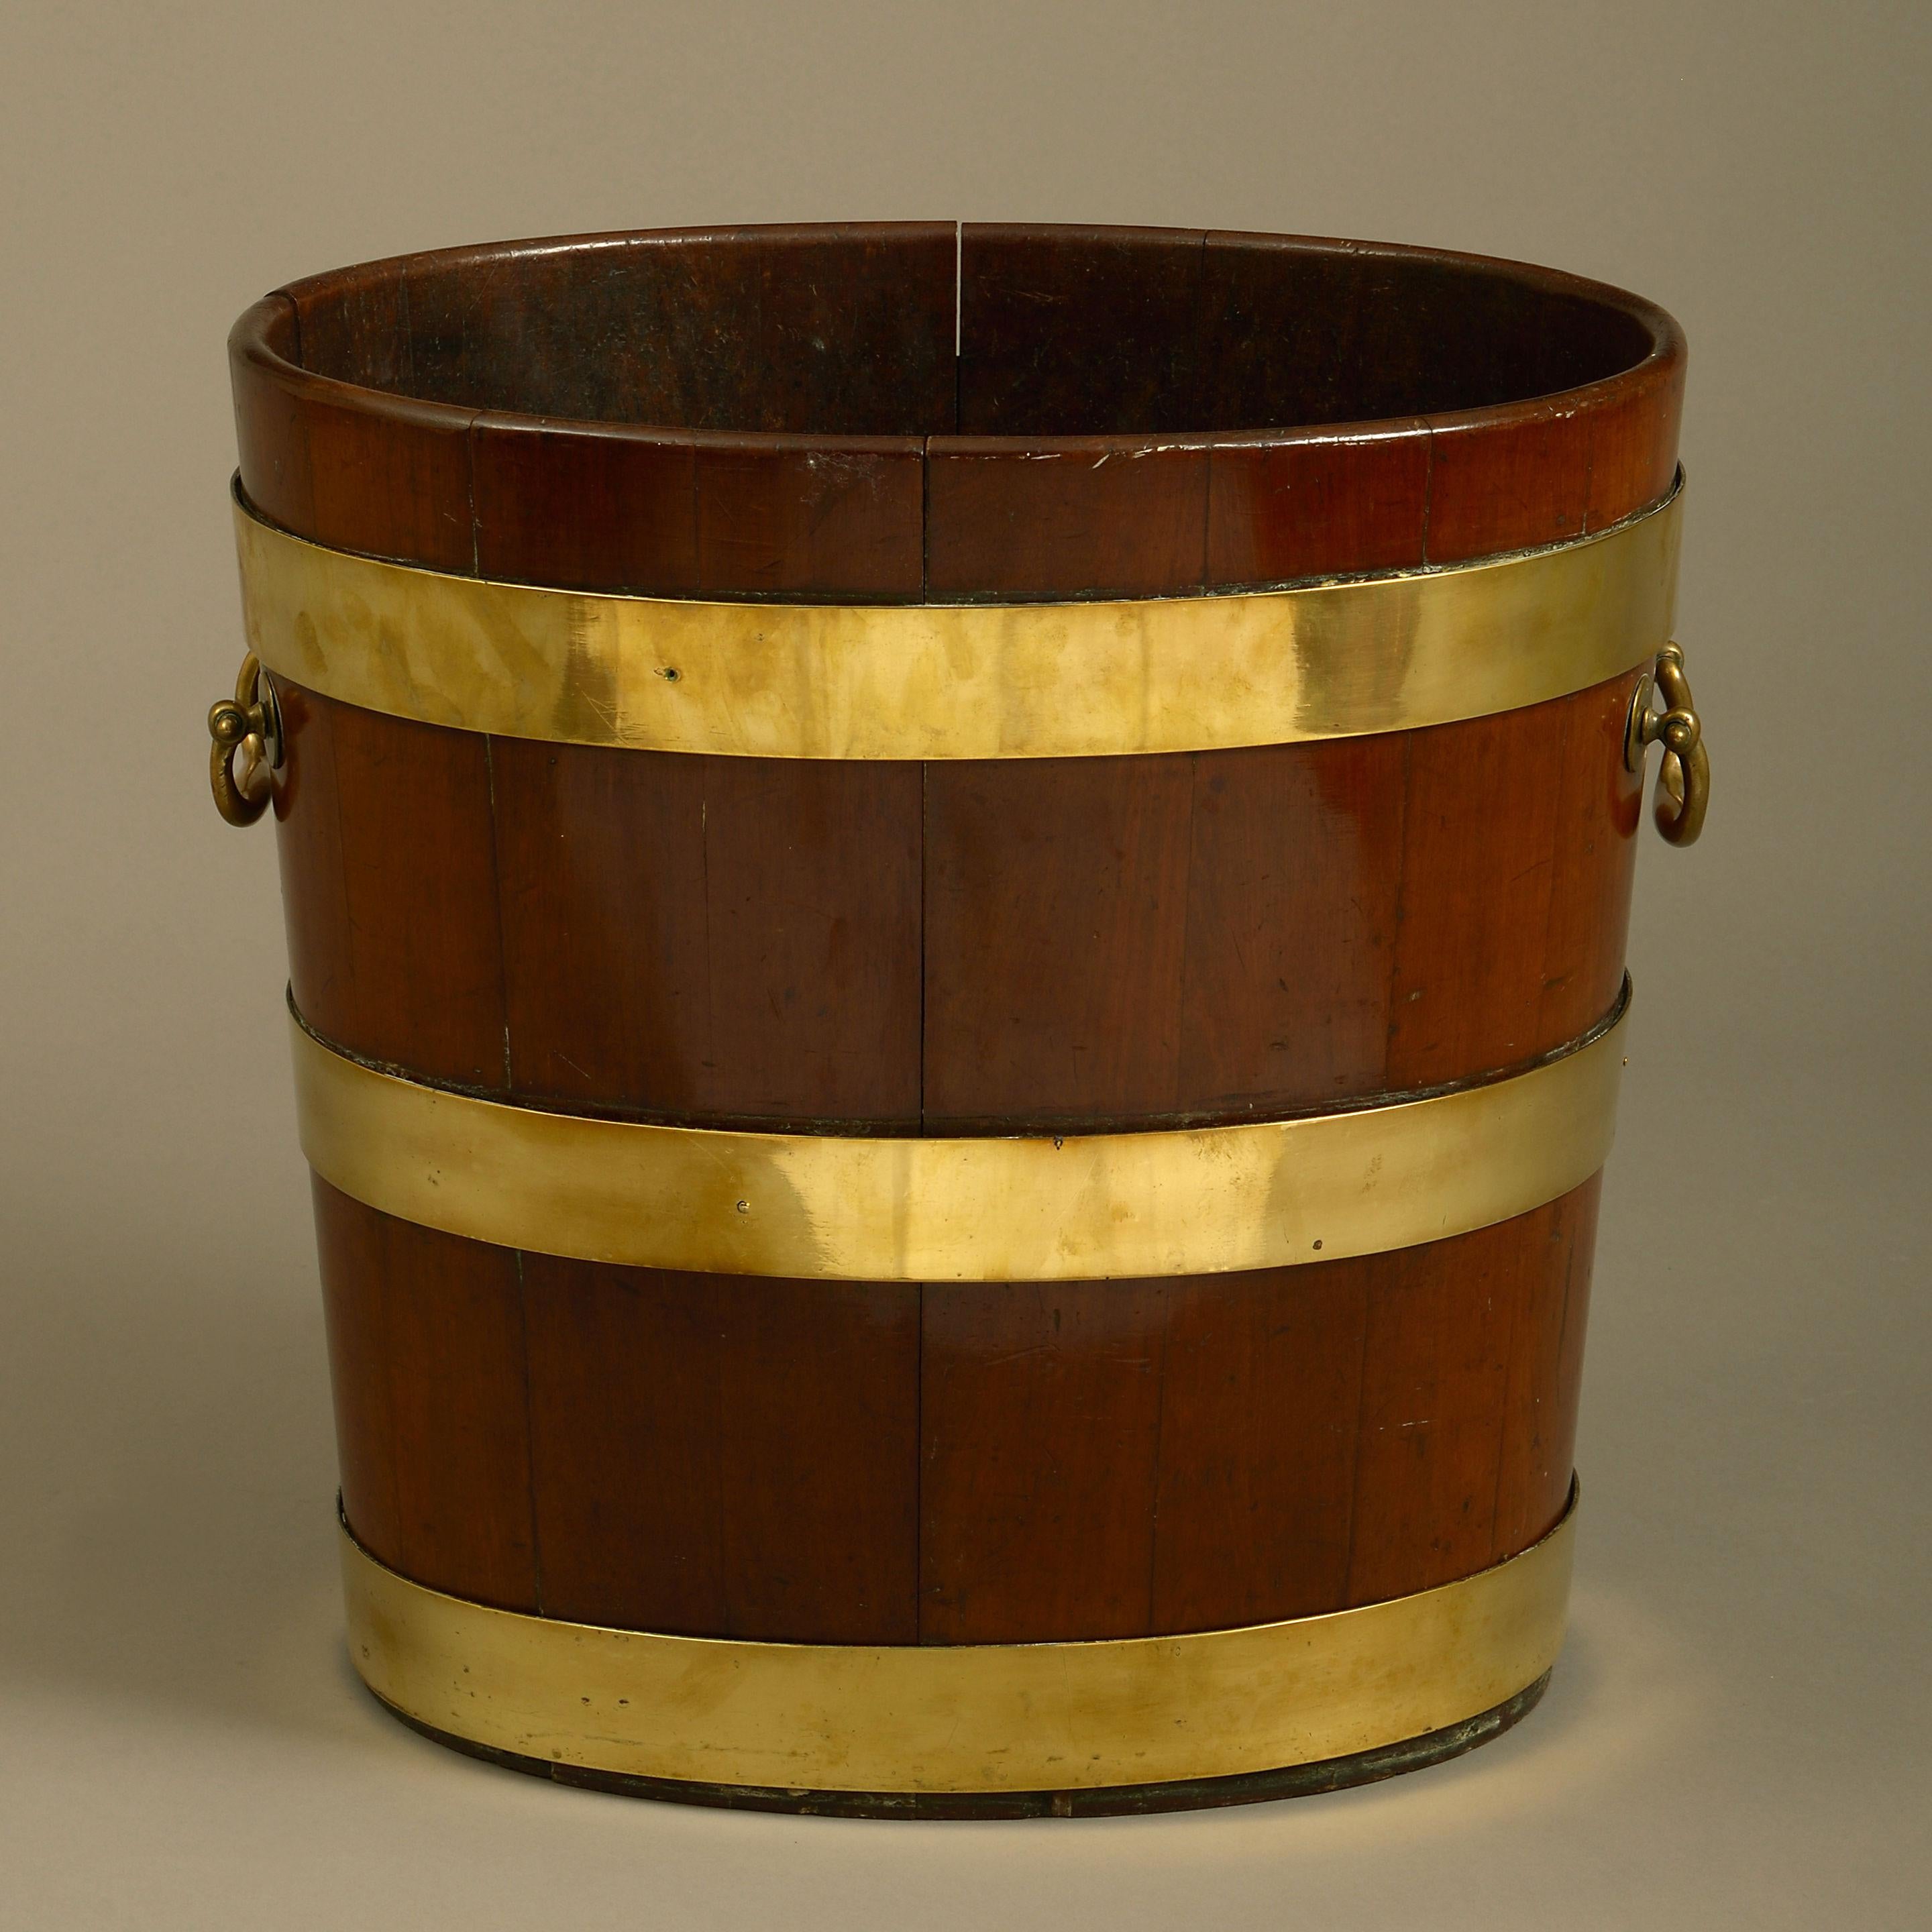 A large late 18th century brass bound and coopered mahogany peat bucket, of oval form, retaining the original carrying handles.